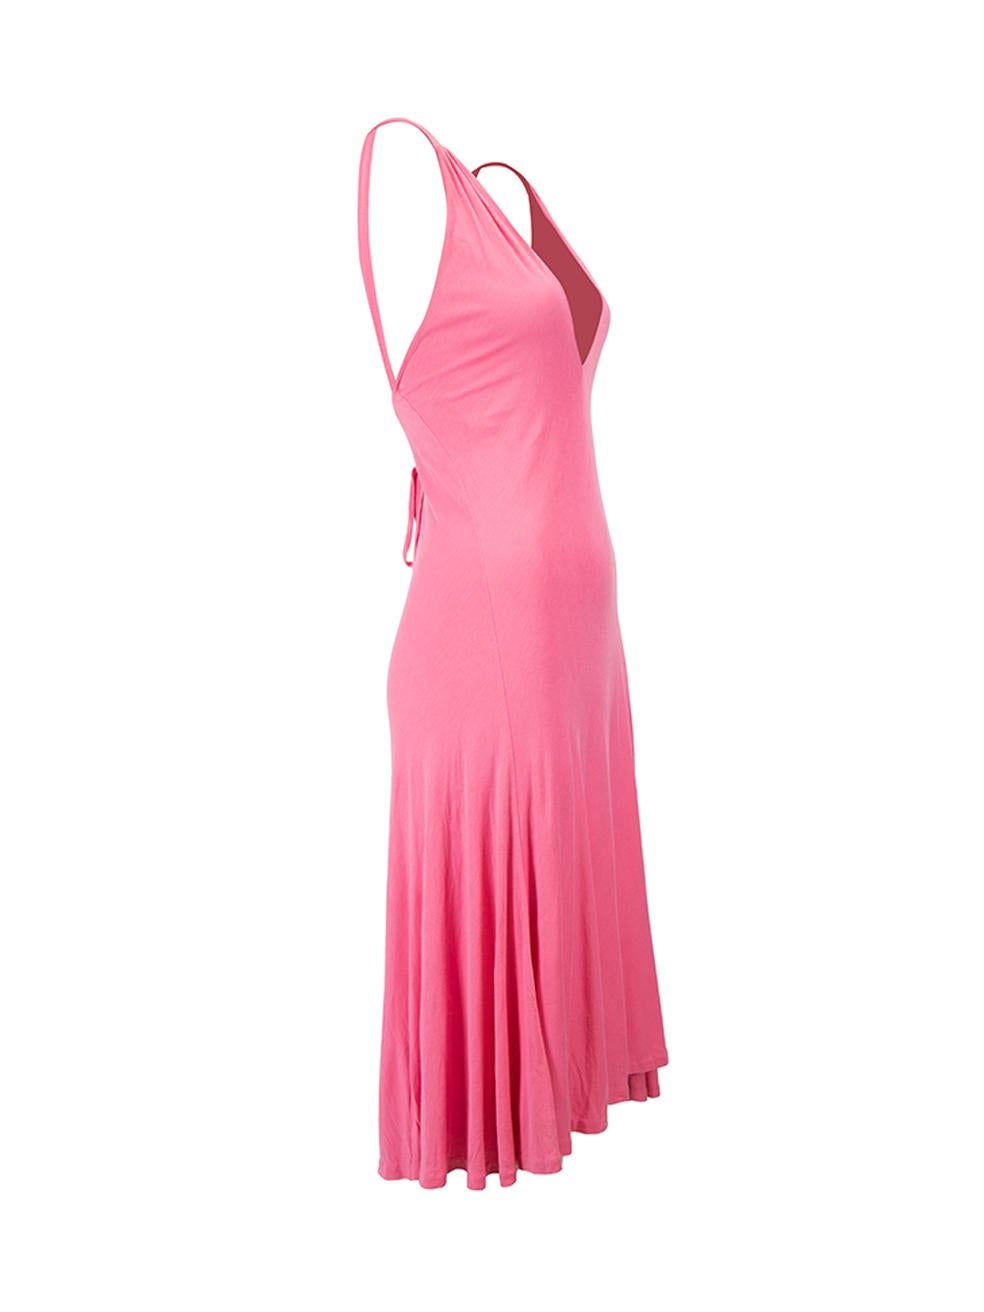 CONDITION is Very good. Hardly any visible wear to dress is evident on this used Ralph Lauren designer resale item.

Details
Pink
Viscose
Shoulder straps
Knee length
V neck
Low back
Loose fit
Slip on

Made in Hong Kong 

Composition
100%